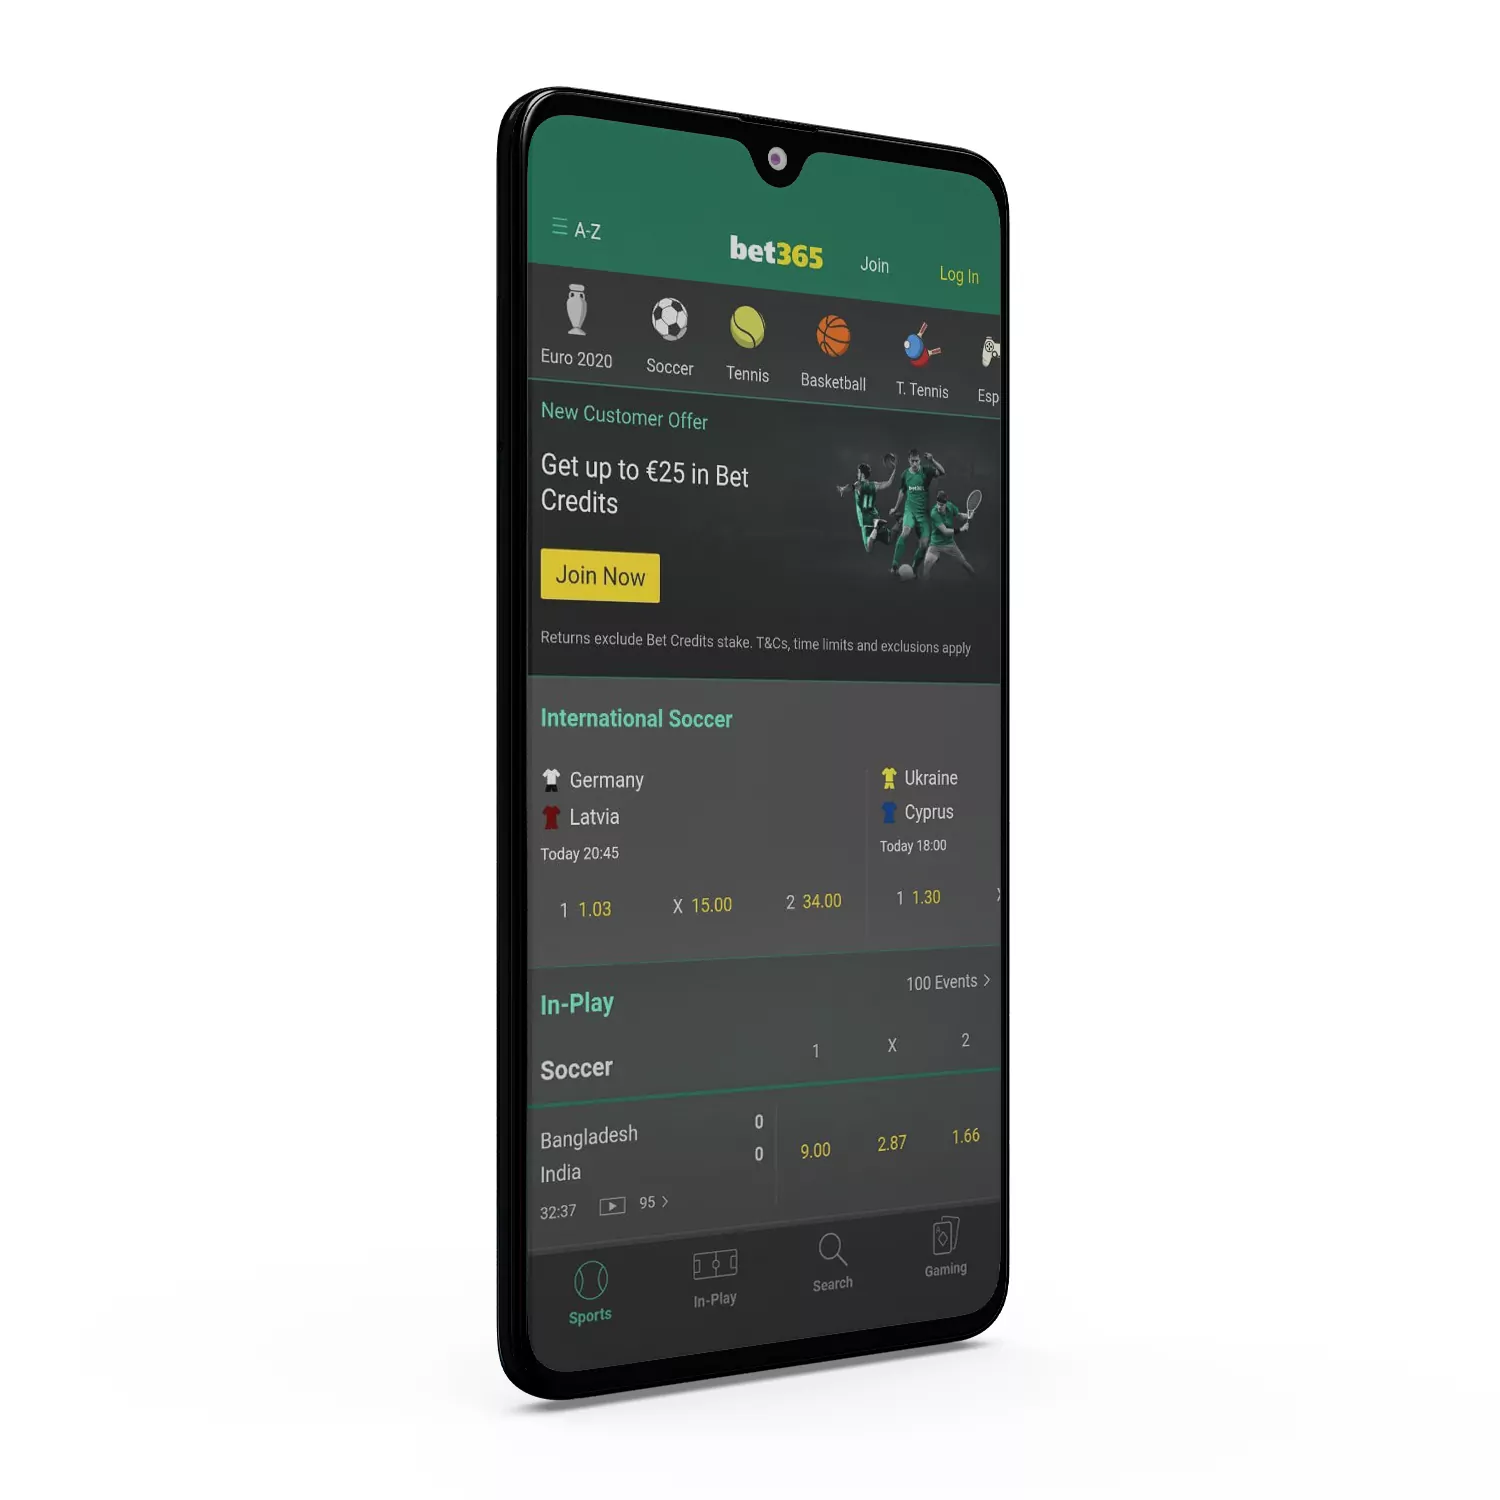 The app of Bet365 has an incredible design and user-friendly interface.